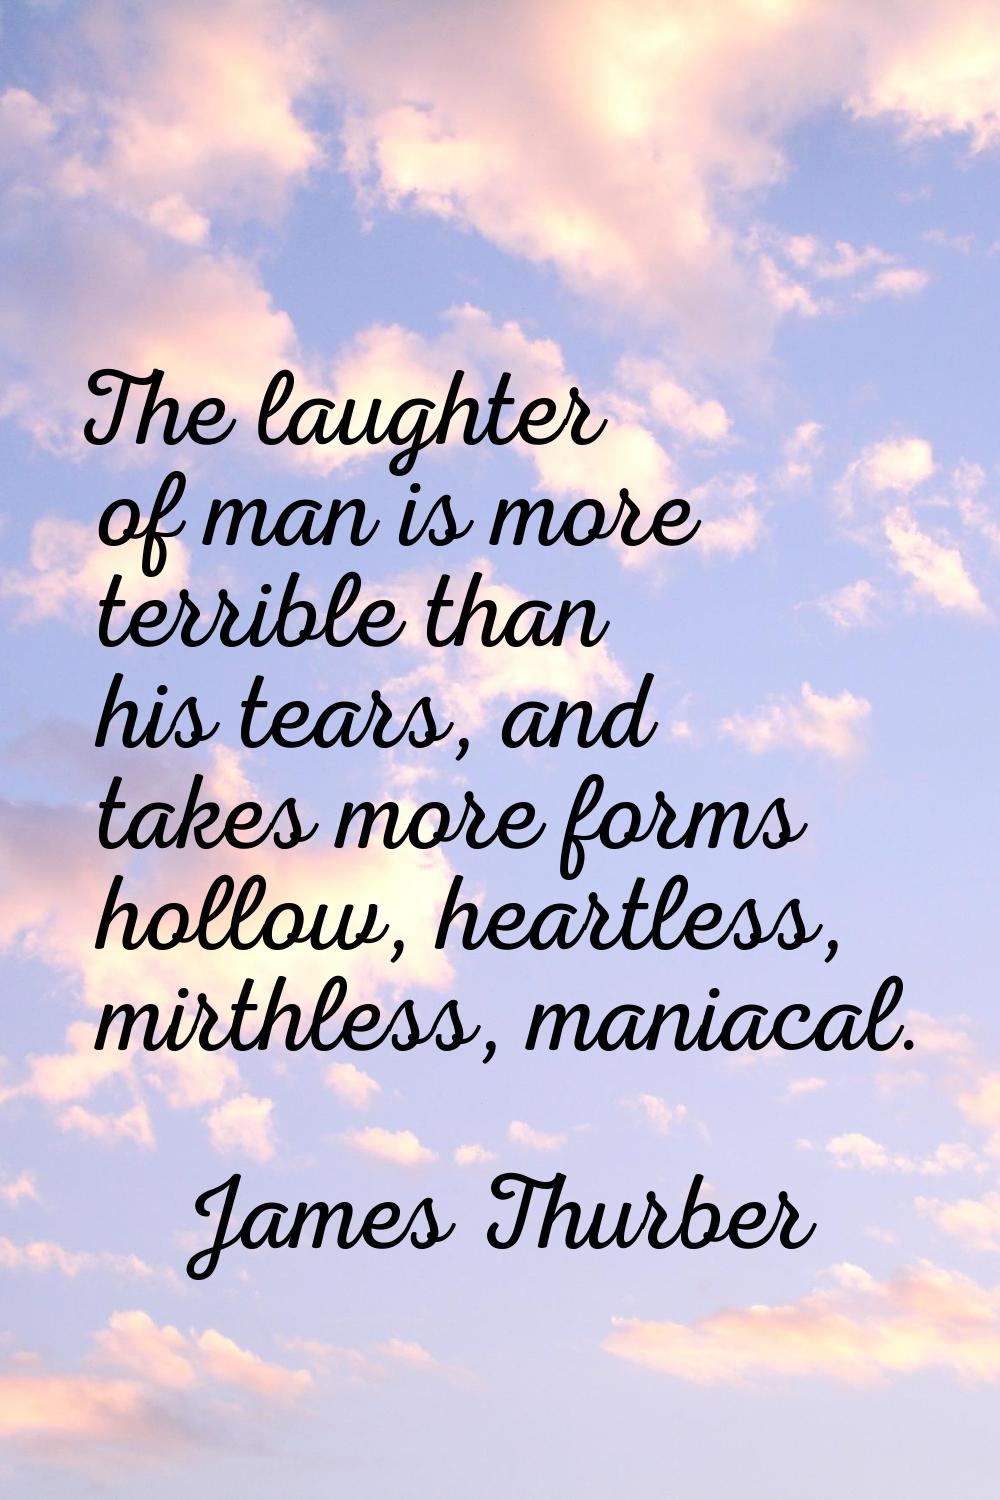 The laughter of man is more terrible than his tears, and takes more forms hollow, heartless, mirthl